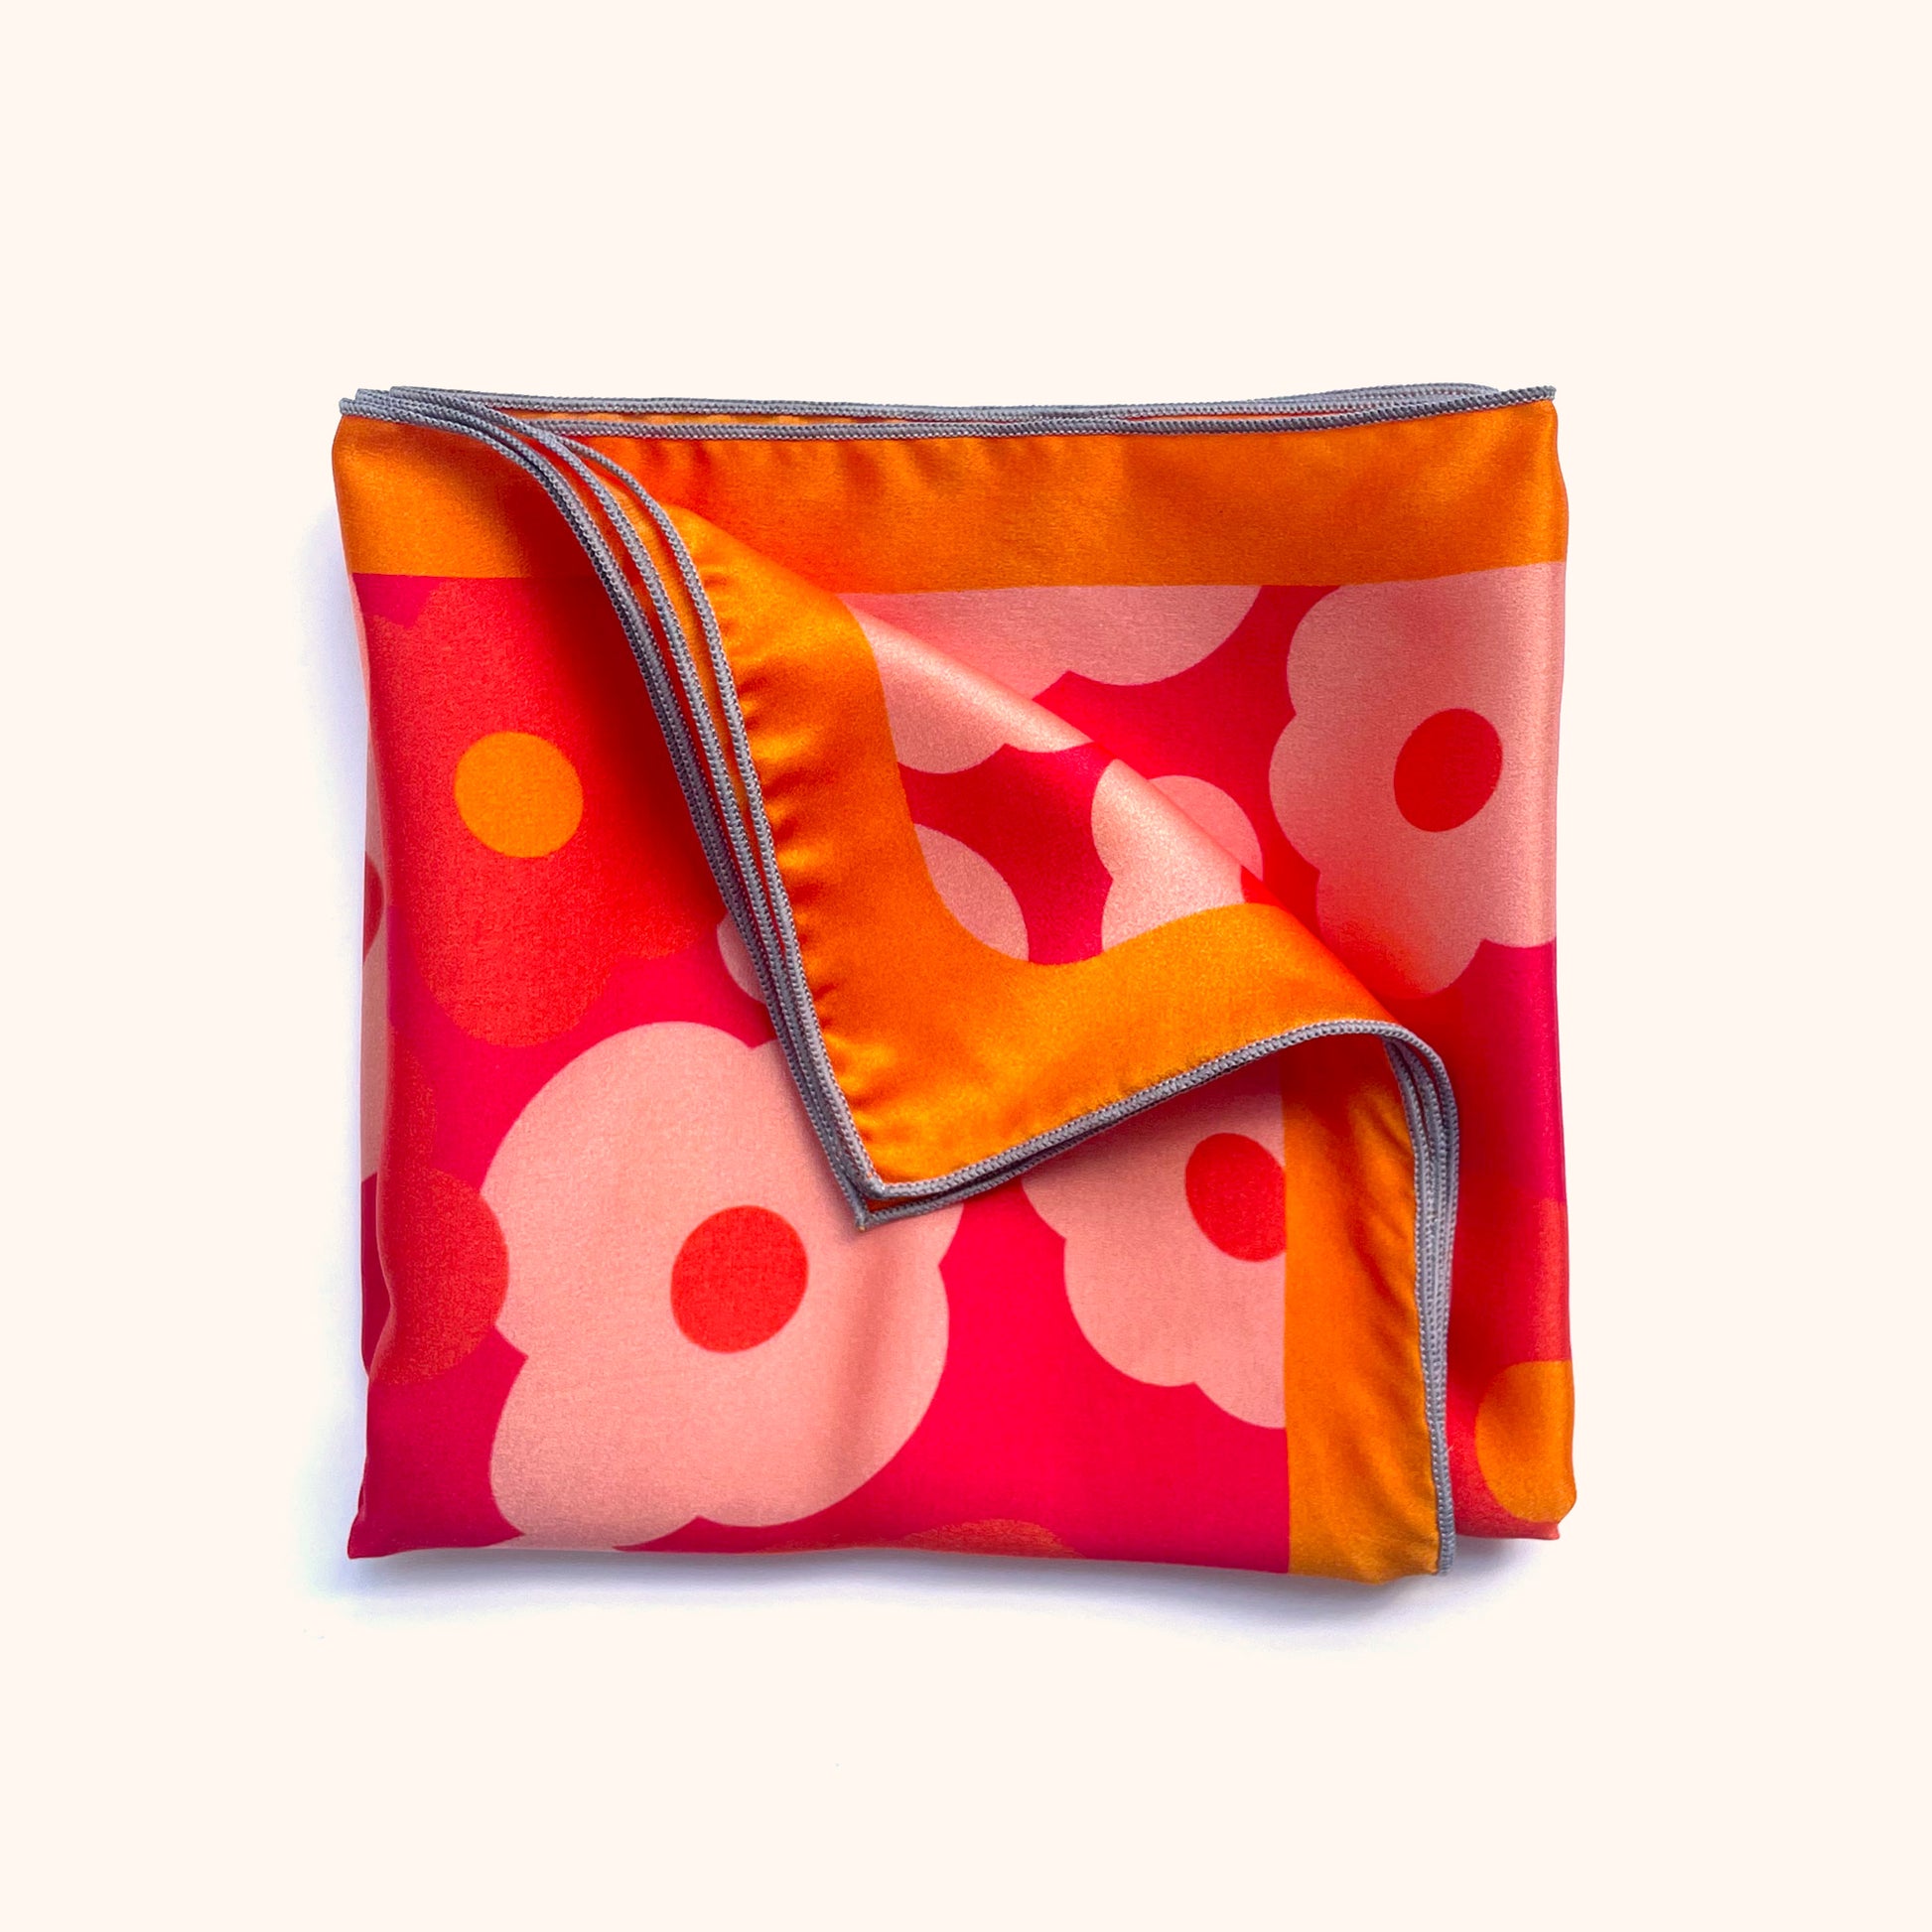 A pink, red, and orange floral print silk scarf that feels like spring year round.